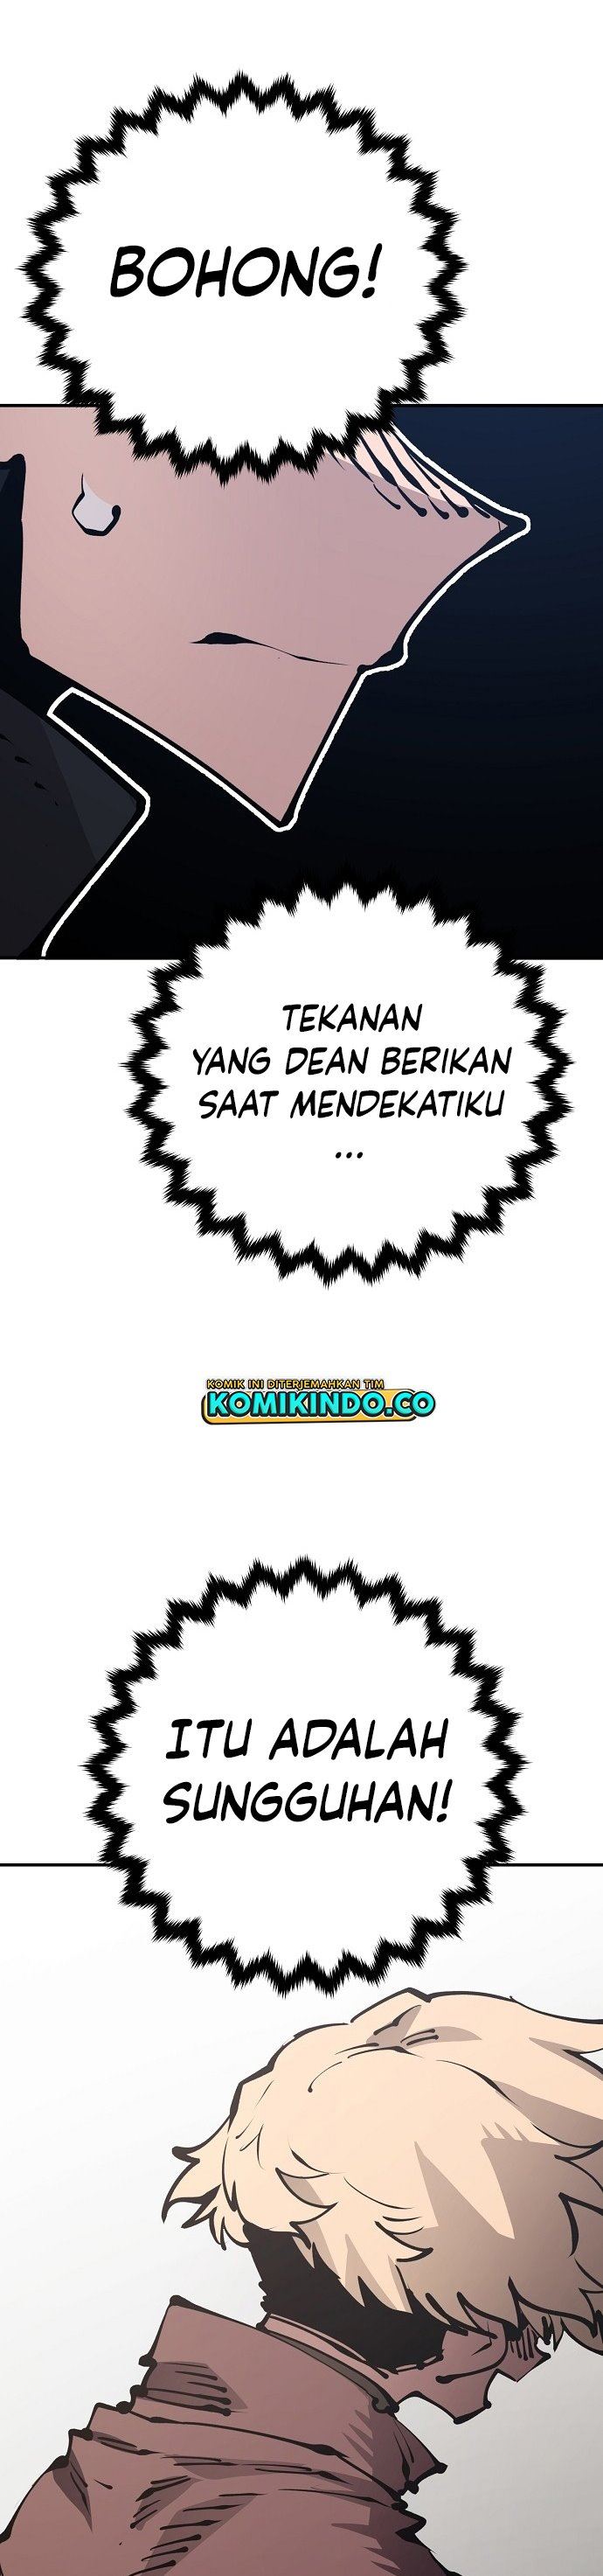 Player Chapter 69